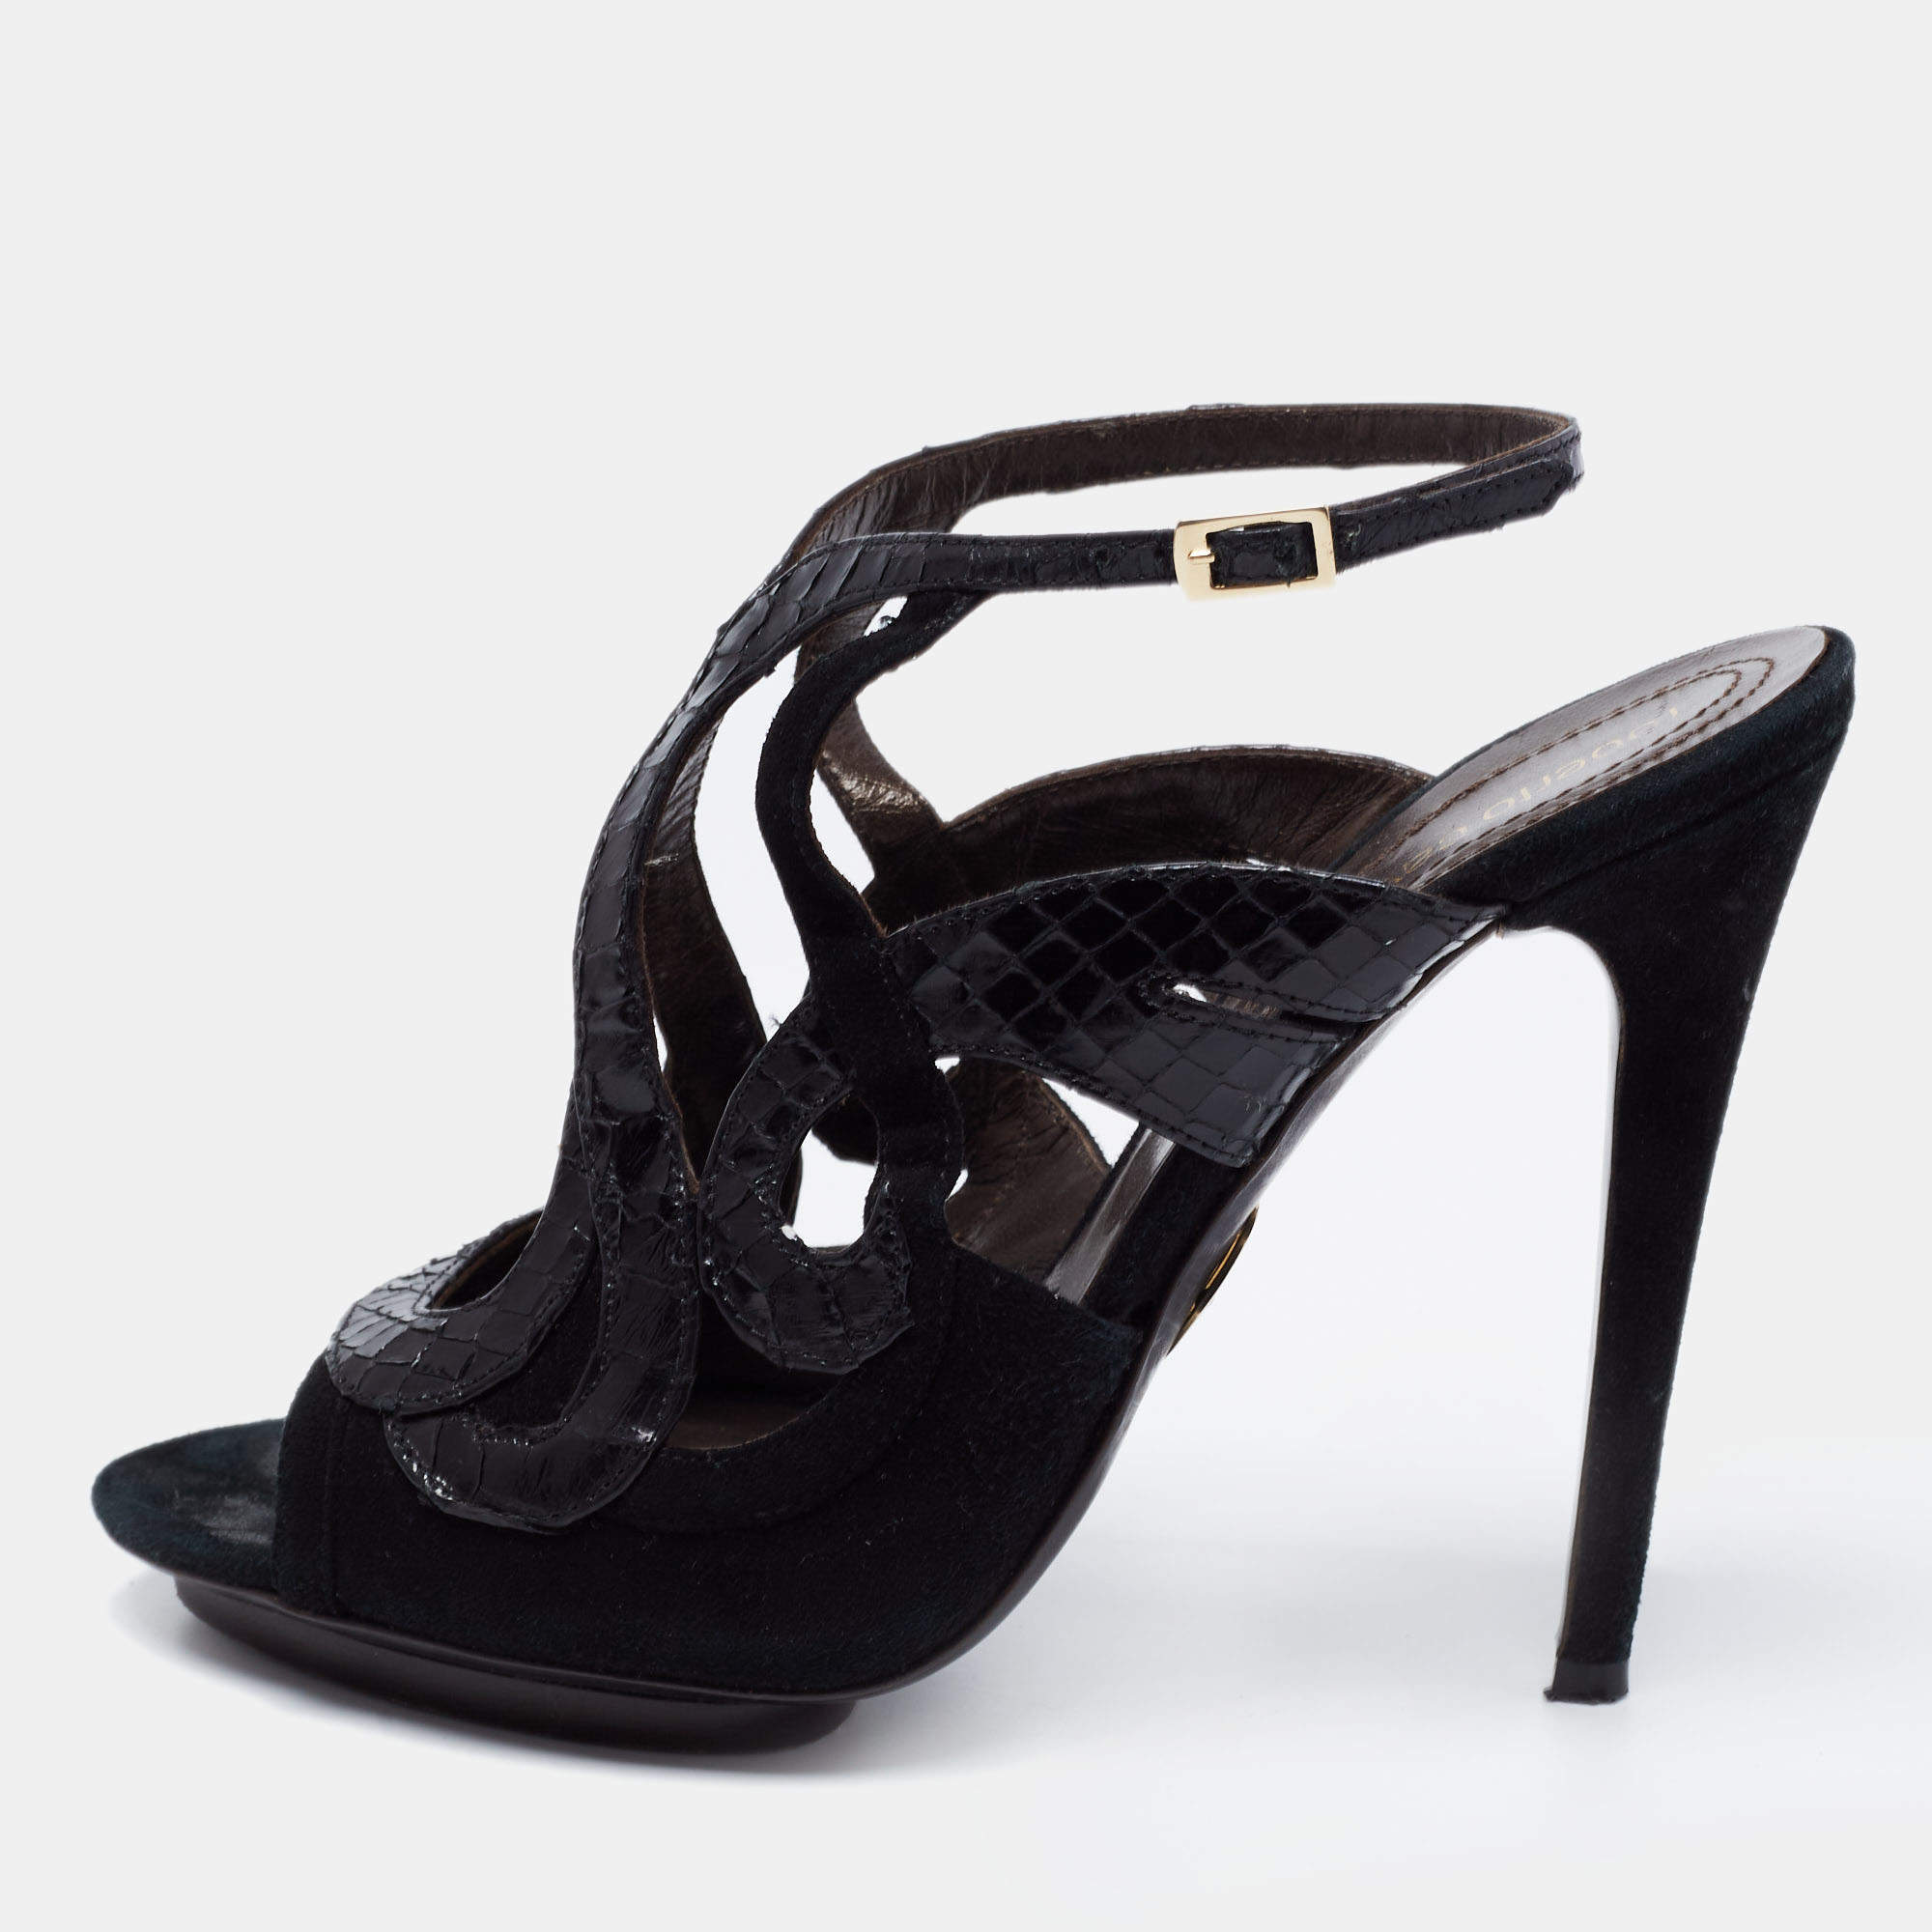 Roberto Cavalli Black Snakeskin Embossed Leather and Suede Ankle Strap Sandals Size 39.5